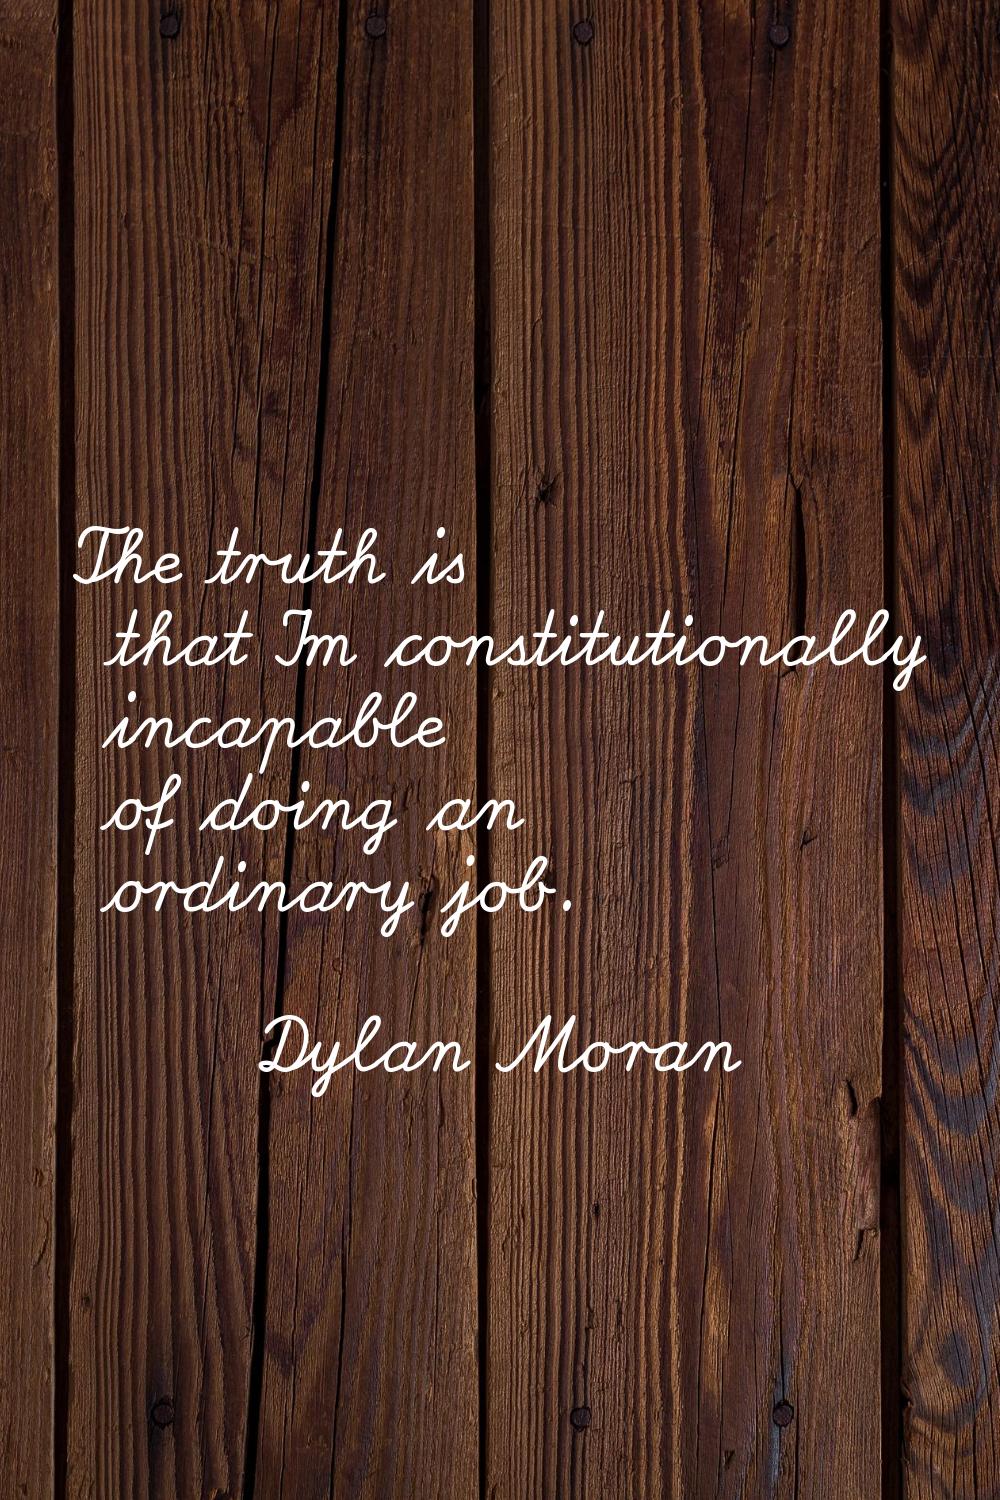 The truth is that I'm constitutionally incapable of doing an ordinary job.